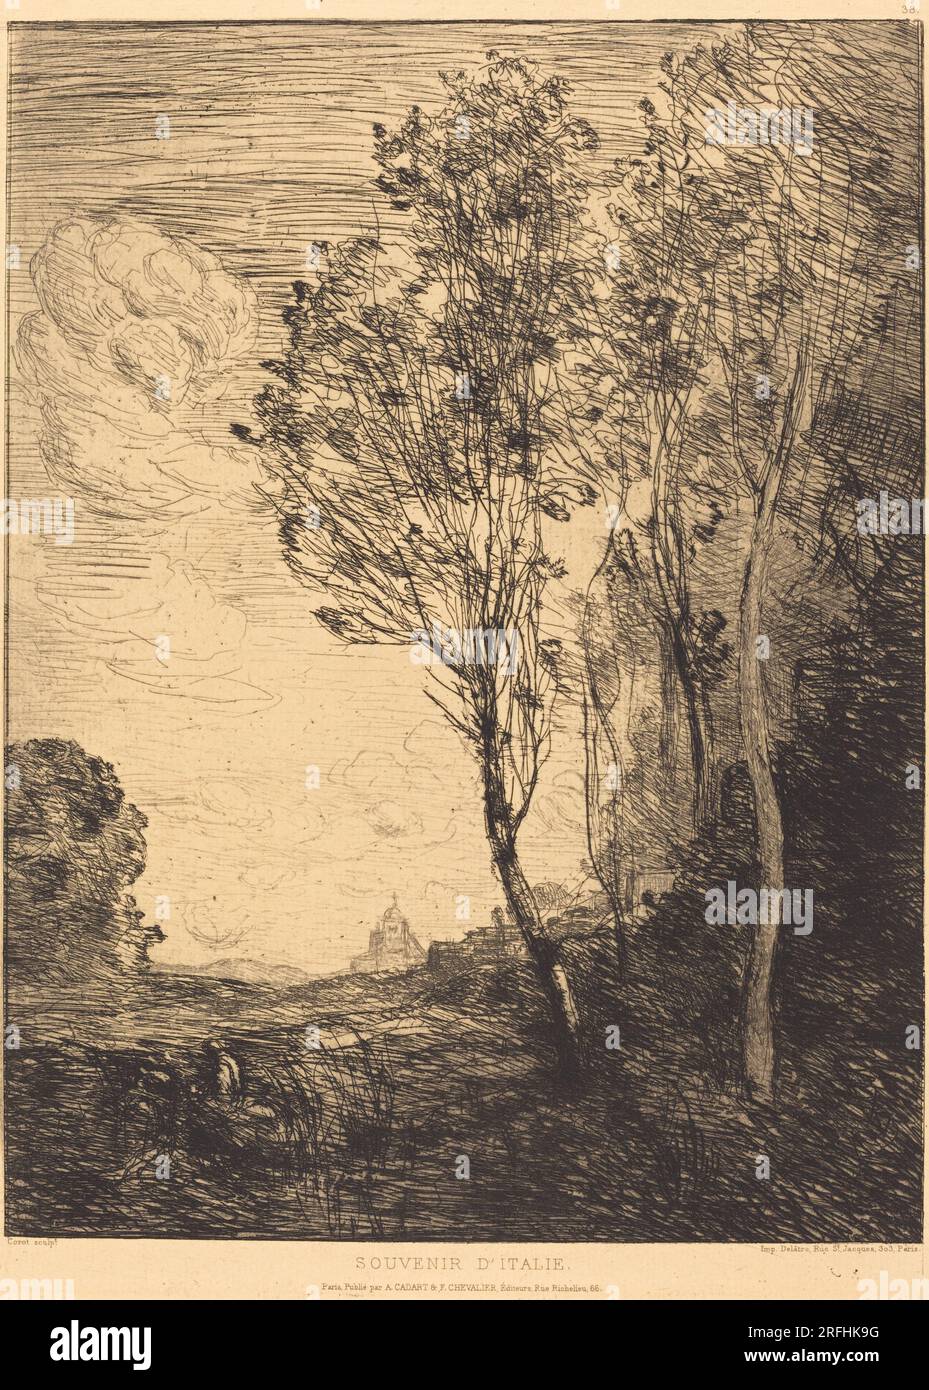 'Jean-Baptiste-Camille Corot, Souvenir of Italy (Souvenir d'Italie), 1866, etching, plate: 31.8 x 23.9 cm (12 1/2 x 9 7/16 in.) sheet: 50.2 x 34.3 cm (19 3/4 x 13 1/2 in.), Rosenwald Collection, 1943.3.2824' Stock Photo